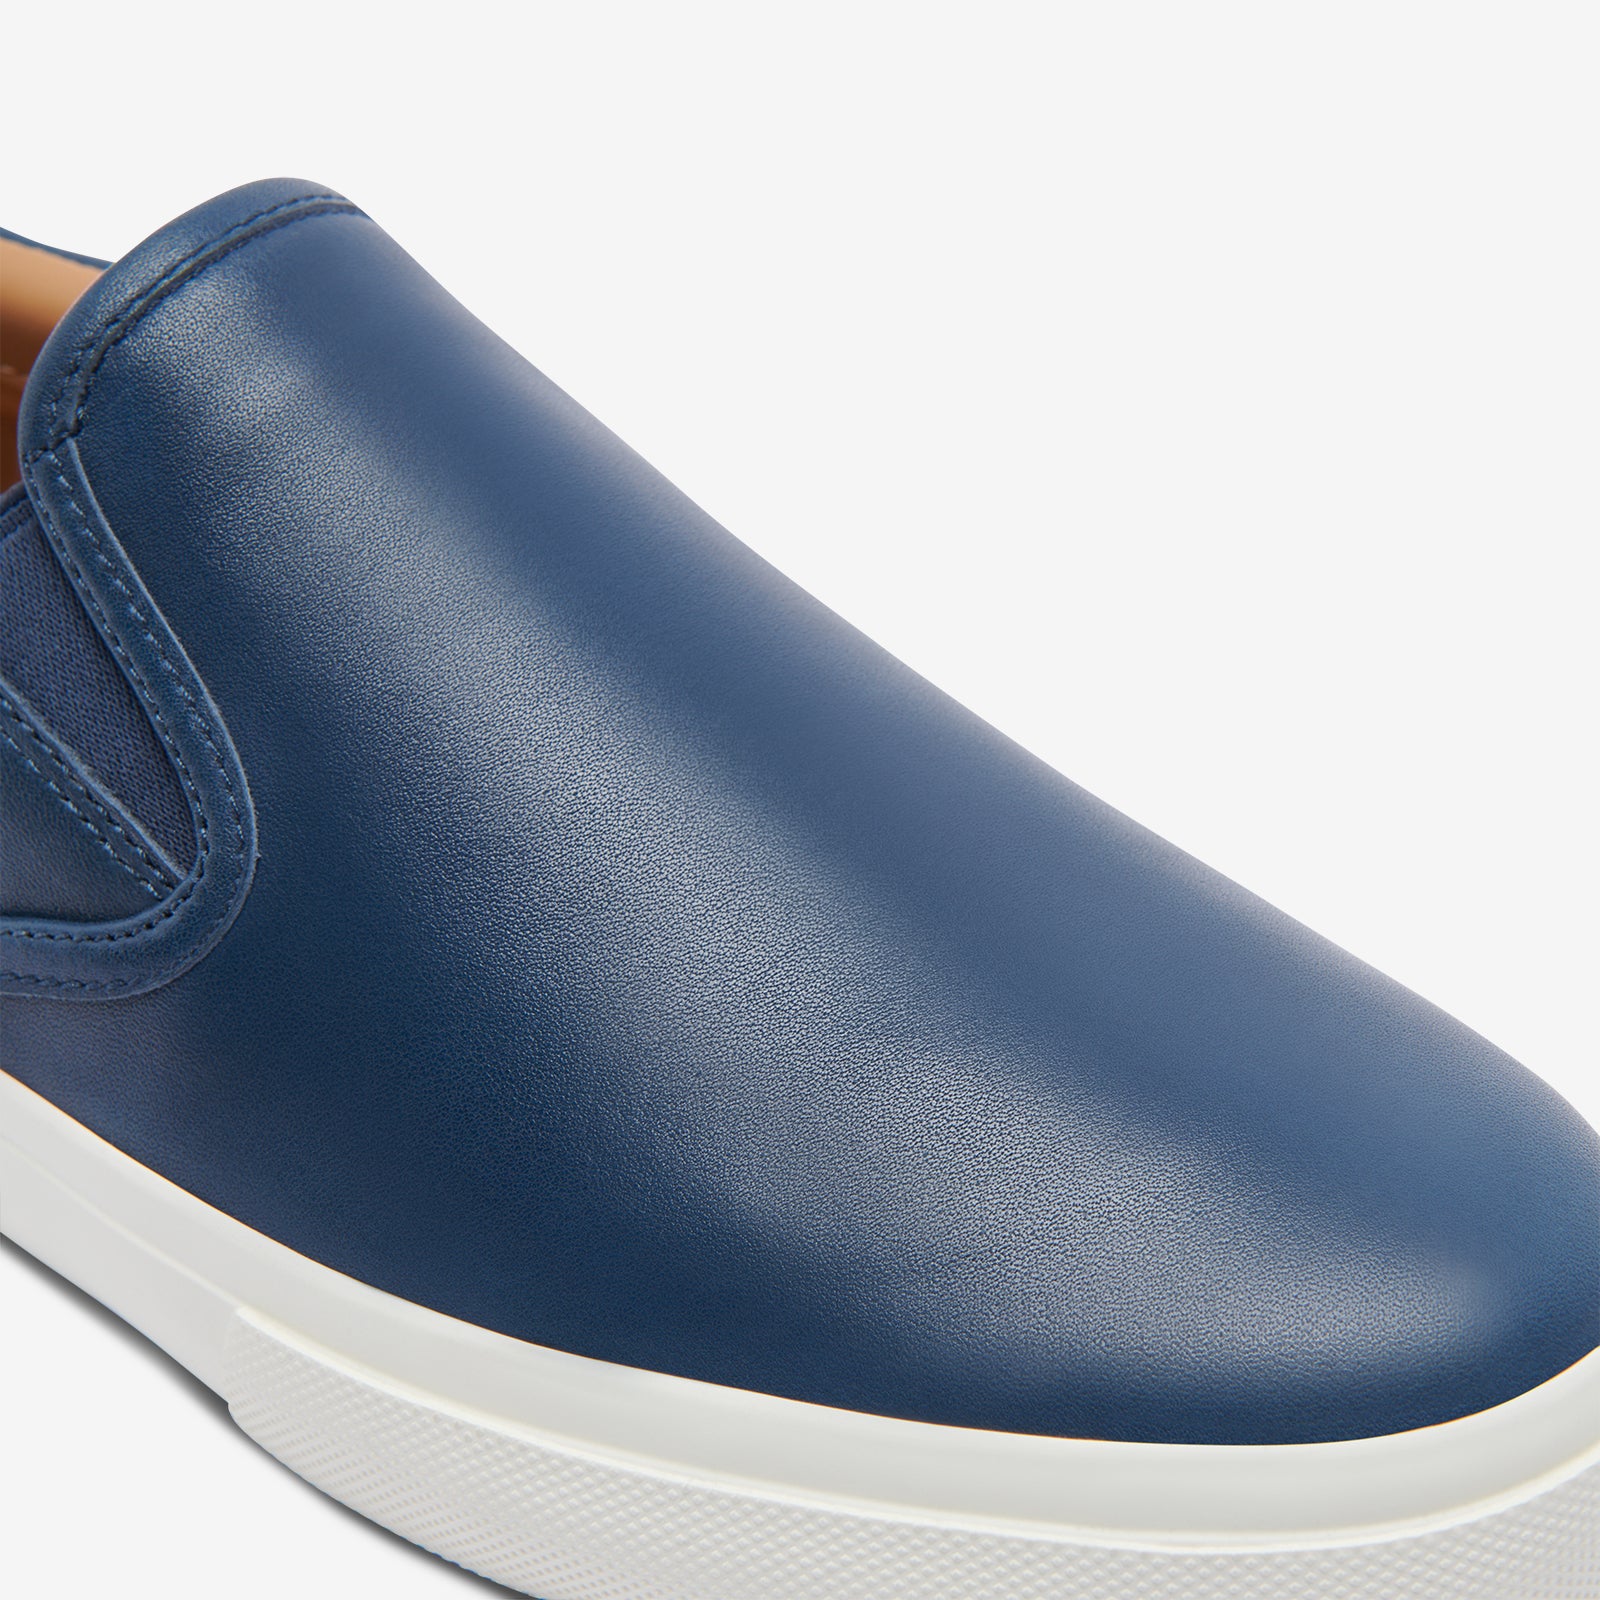 The Wooster Leather - Navy